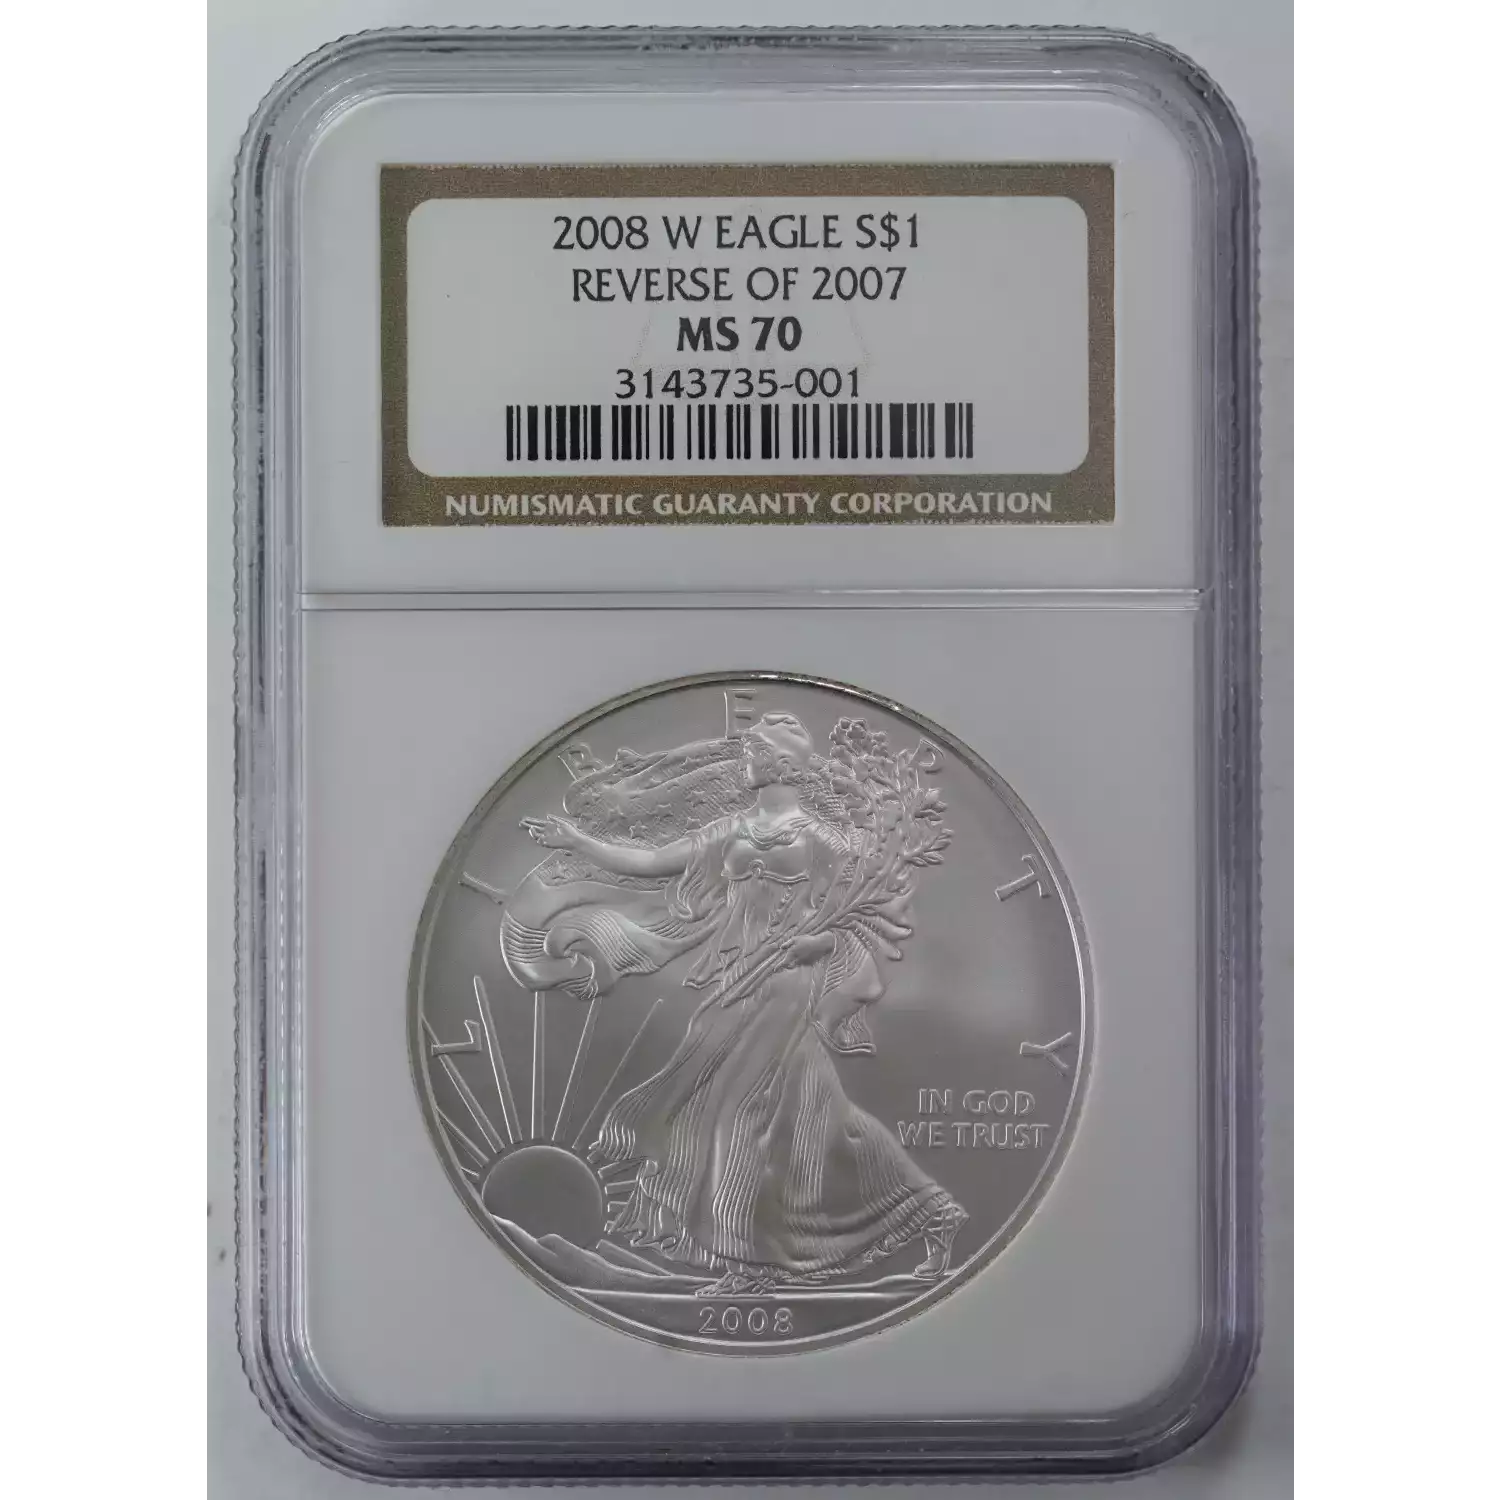 2008 W BURNISHED SILVER EAGLE REVERSE OF 2007  (3)